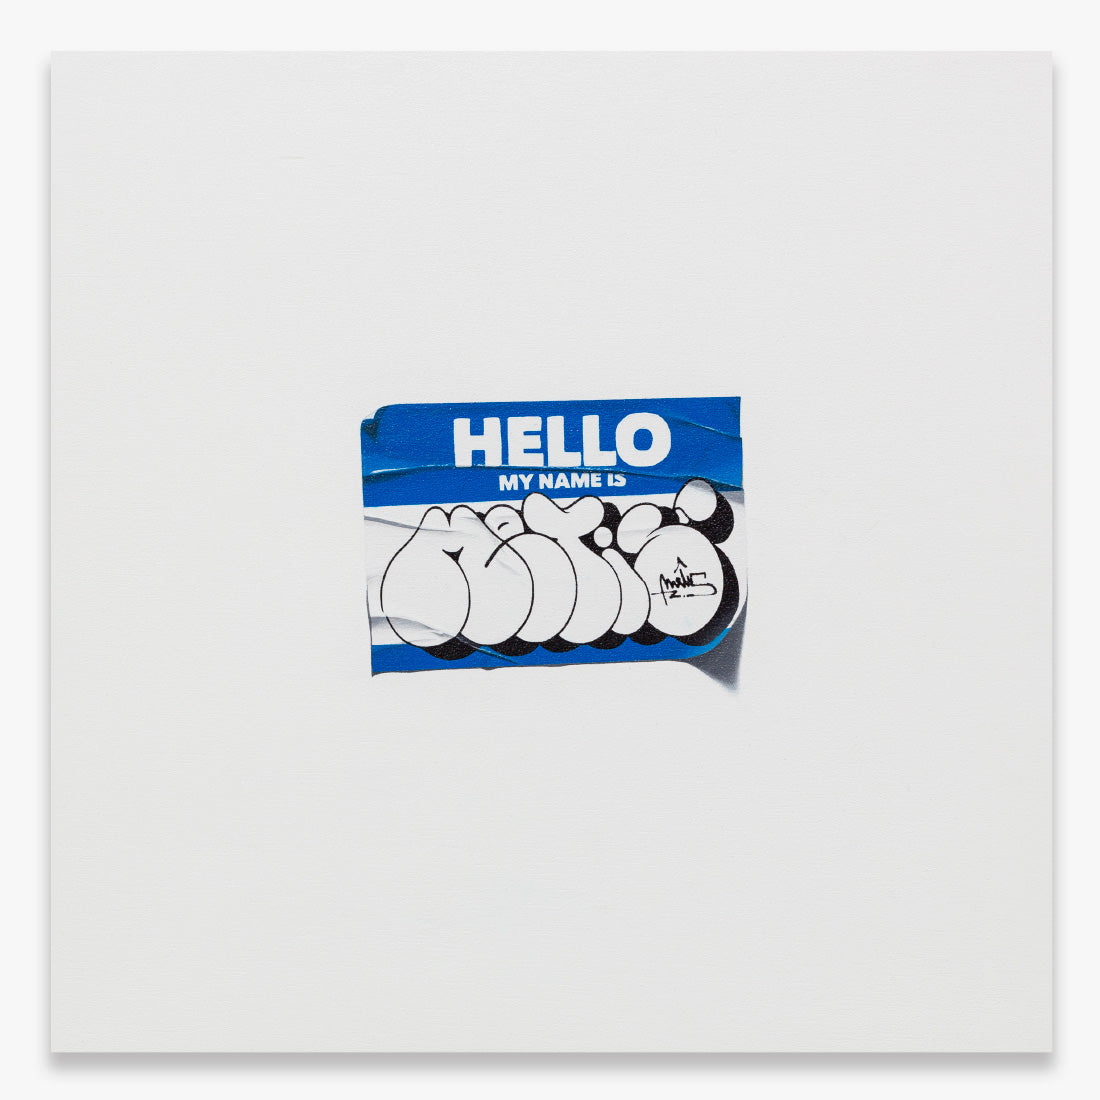 Sticker Hello My Name is Metis BLUE I